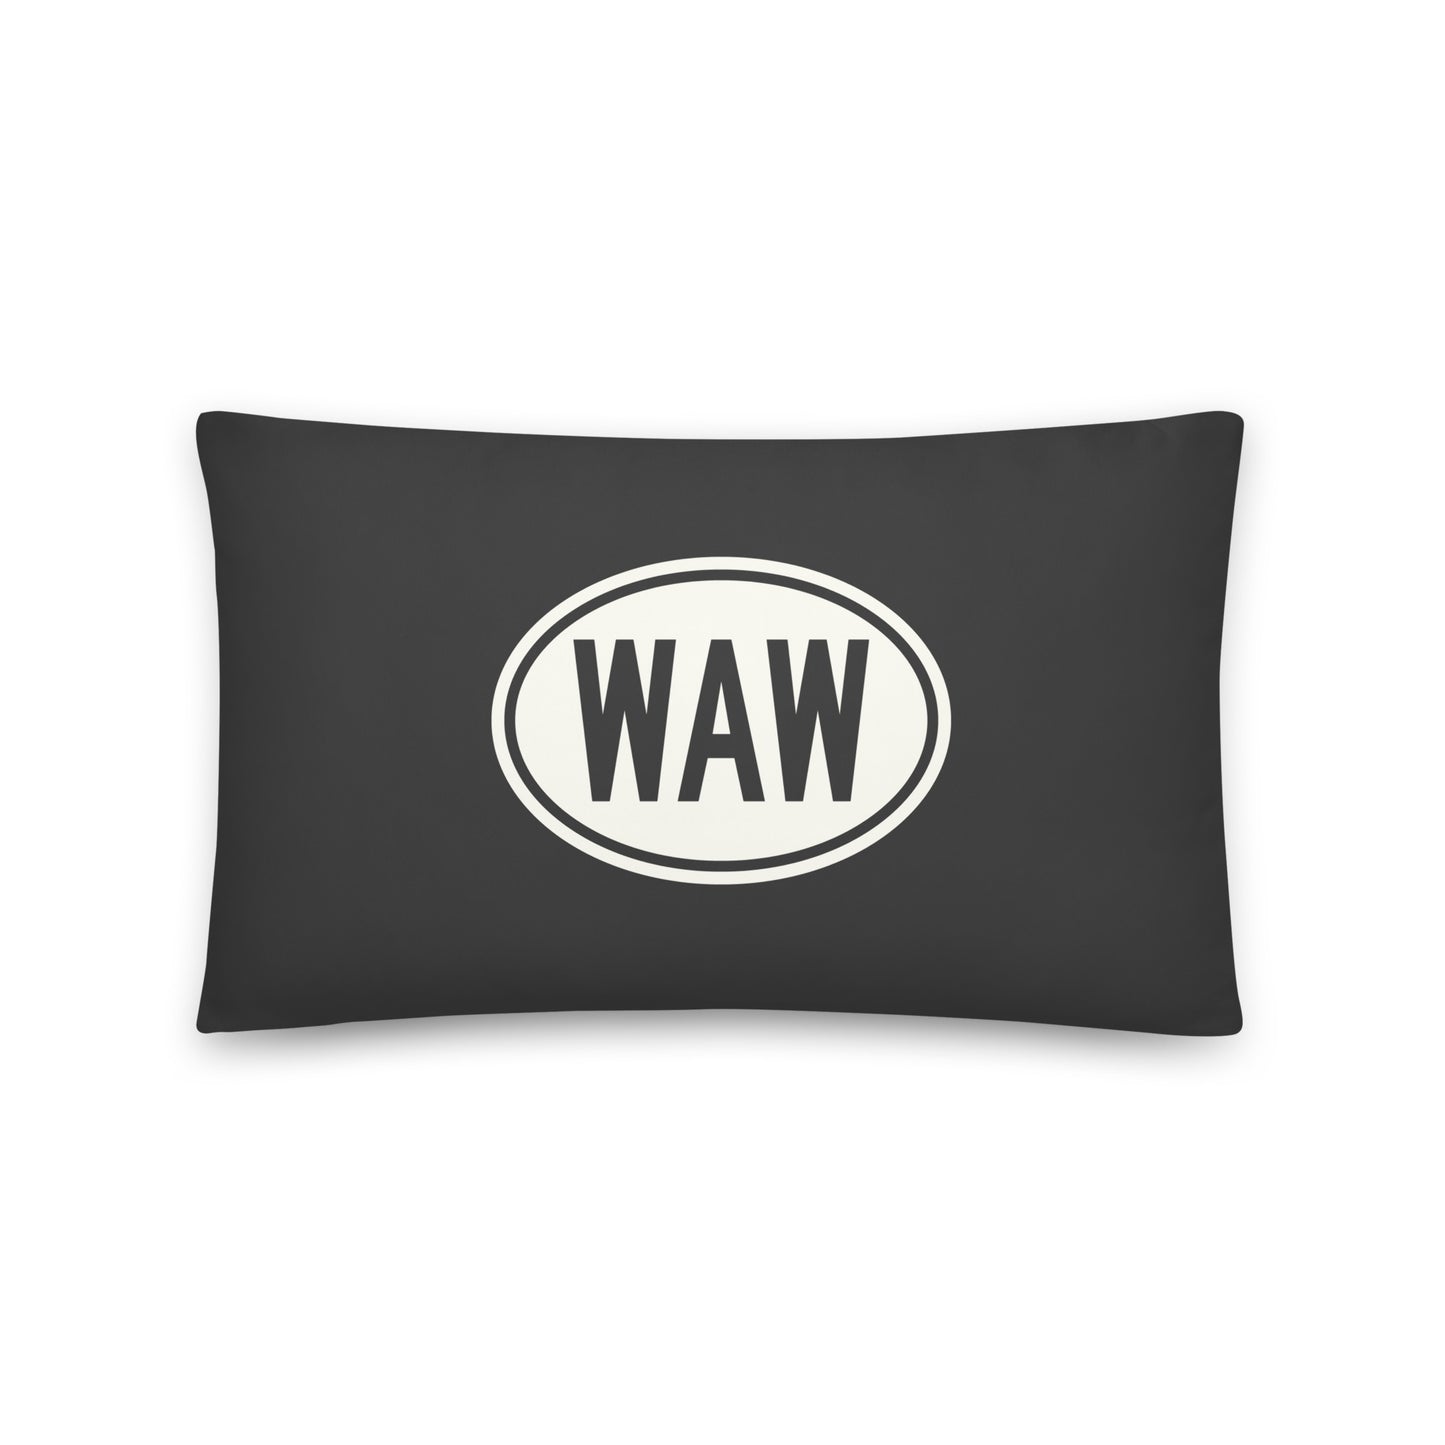 Unique Travel Gift Throw Pillow - White Oval • WAW Warsaw • YHM Designs - Image 01